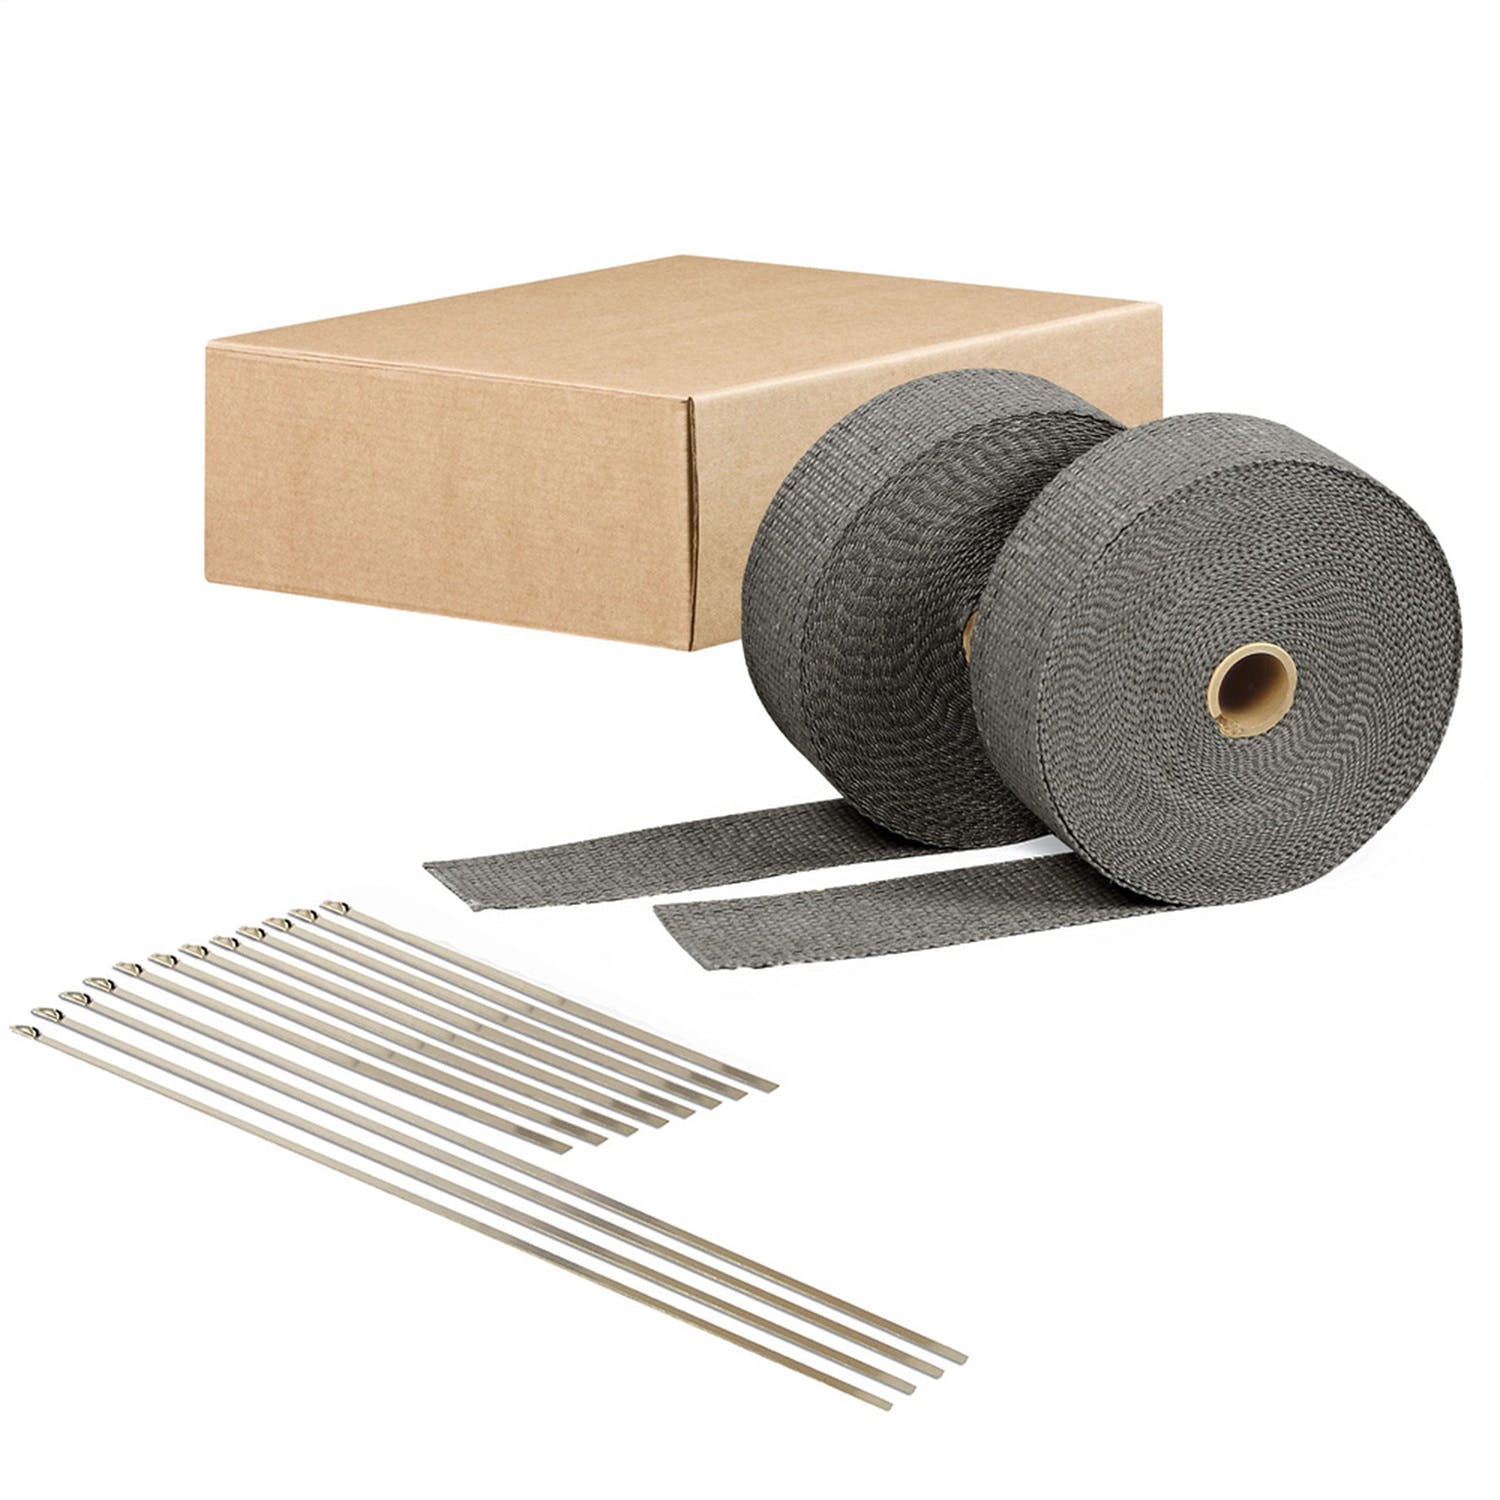 Design Engineering, Inc. 95108 Exhaust Wrap Promo Kit (2 - 50ft Black Wrap and Combo Tie Kit)